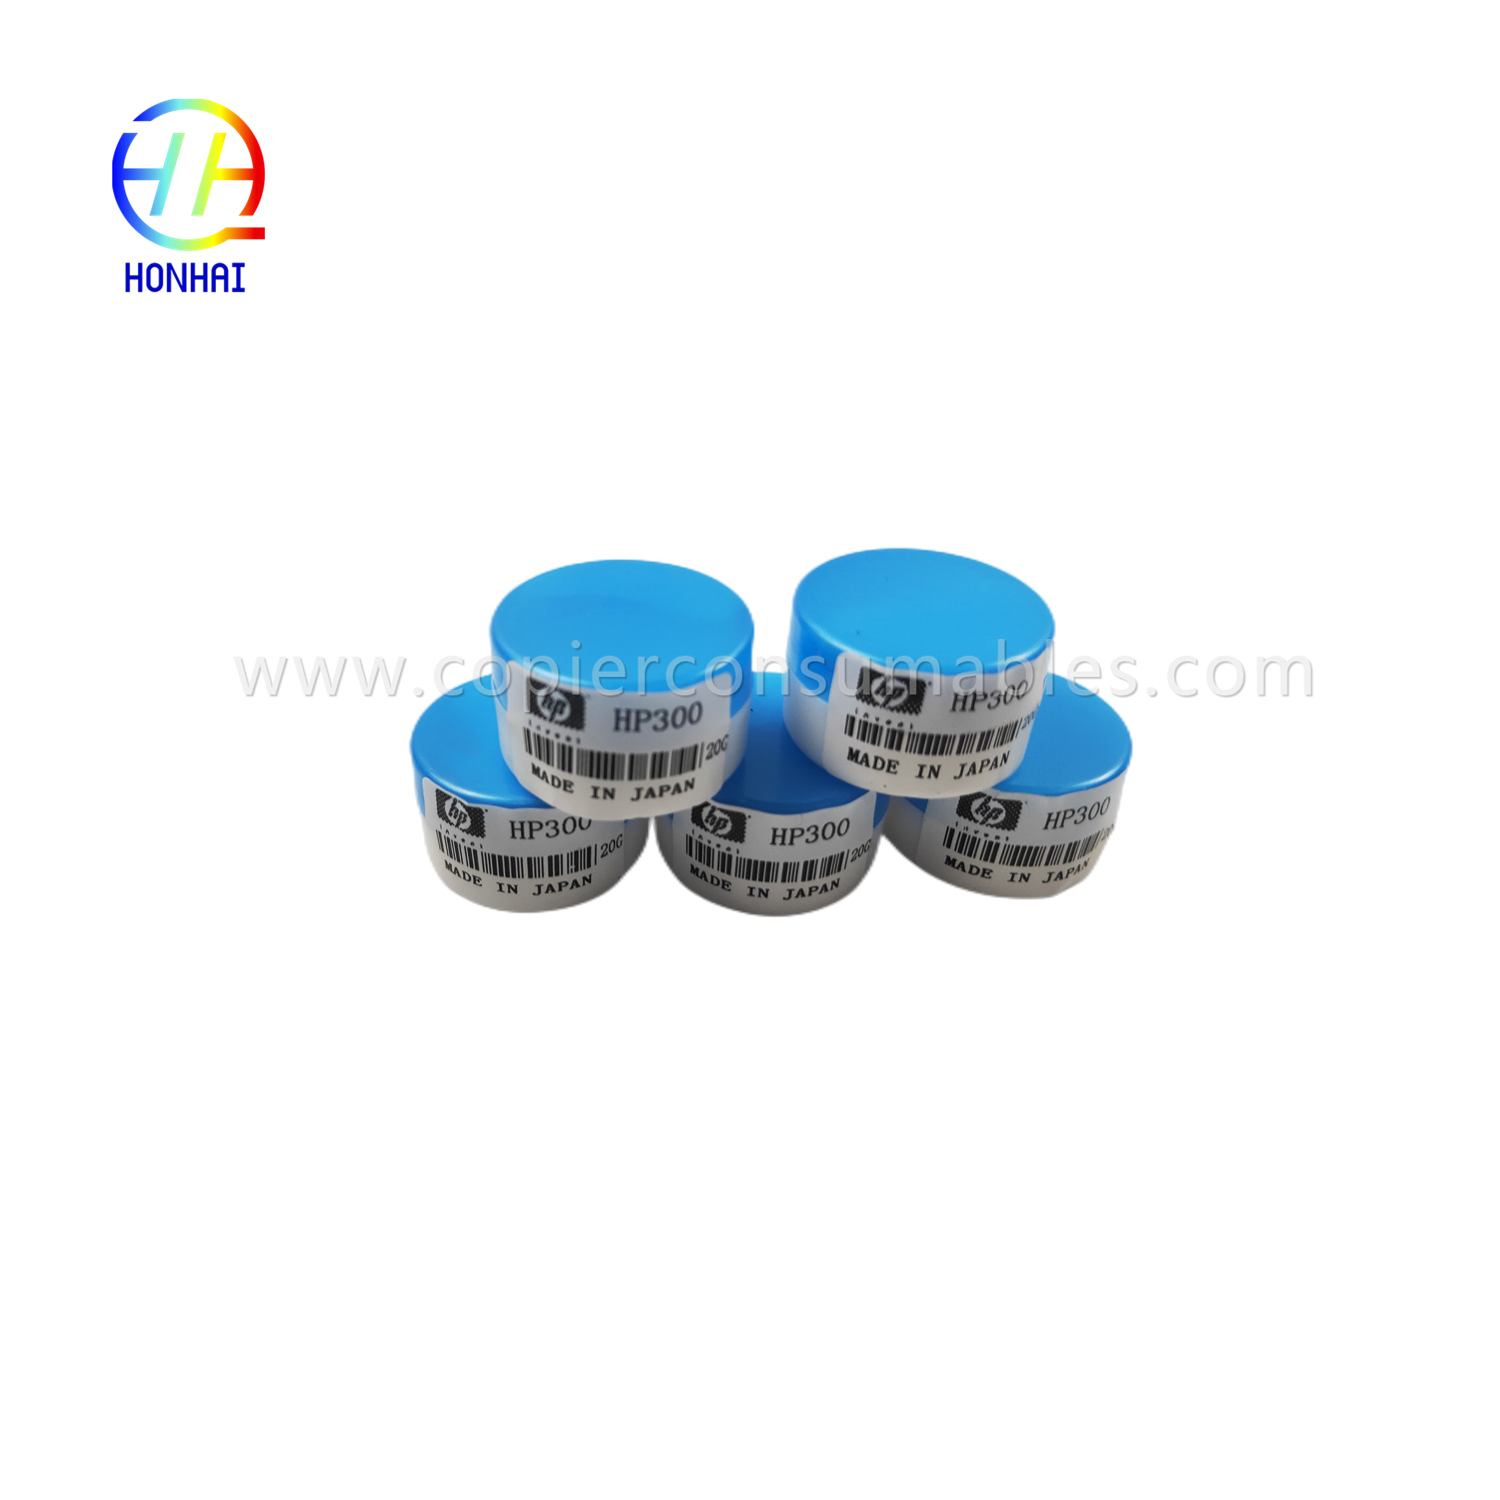 https://c585.goodao.net/original-grease-20g-g8005-hp300-for-hp-canon-brother-lexmark-xerox-epson-series-fuser-film-sleeves-product/